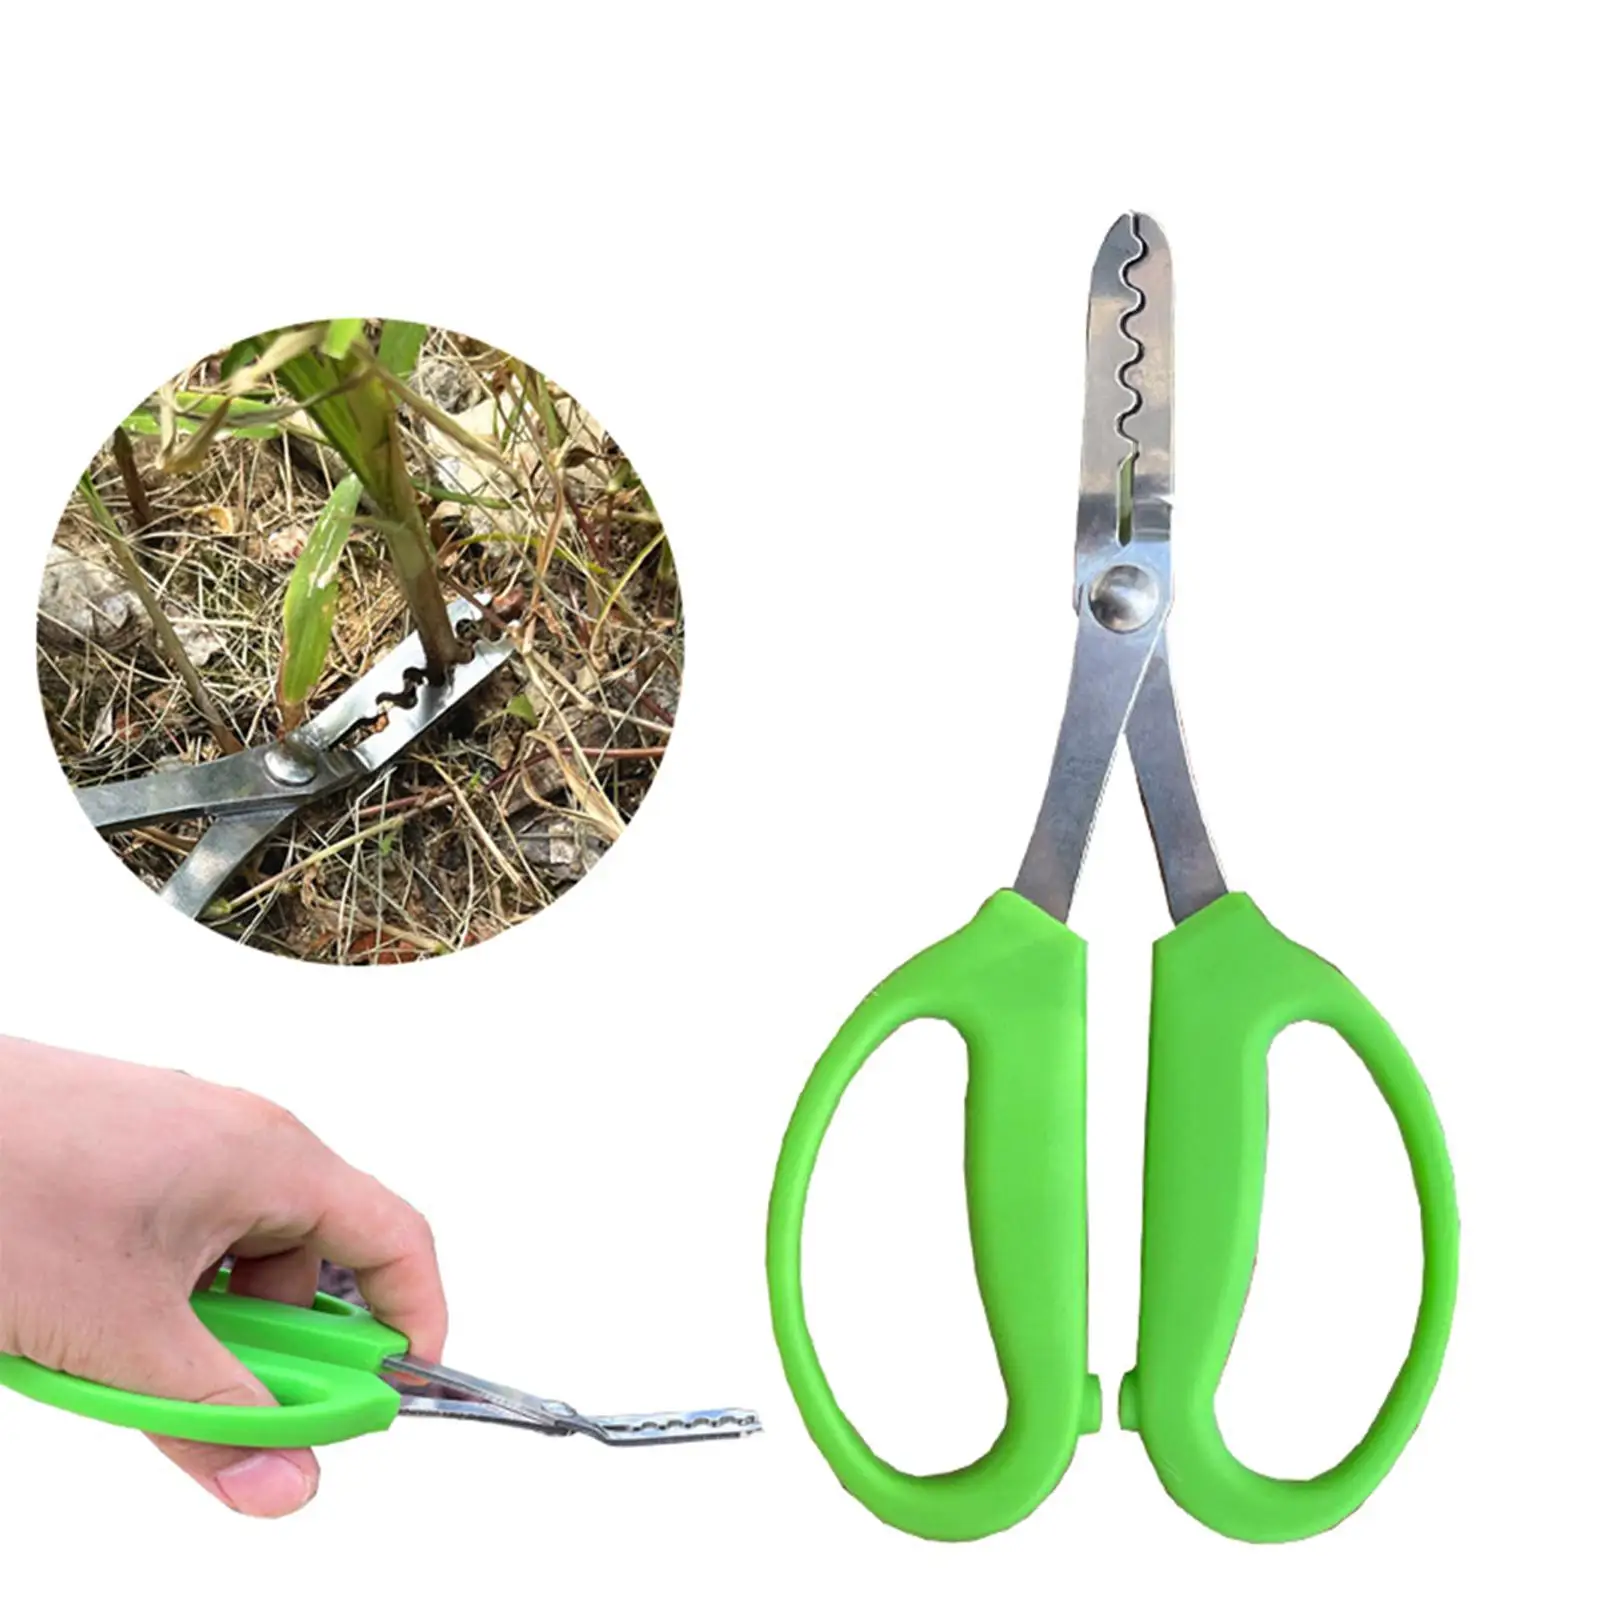 Hand Weeder Gardening Scissors with Jaws Polished Smooth Length 17cm Durable Manual Weed Puller Remover for Potted Plants Bonsai